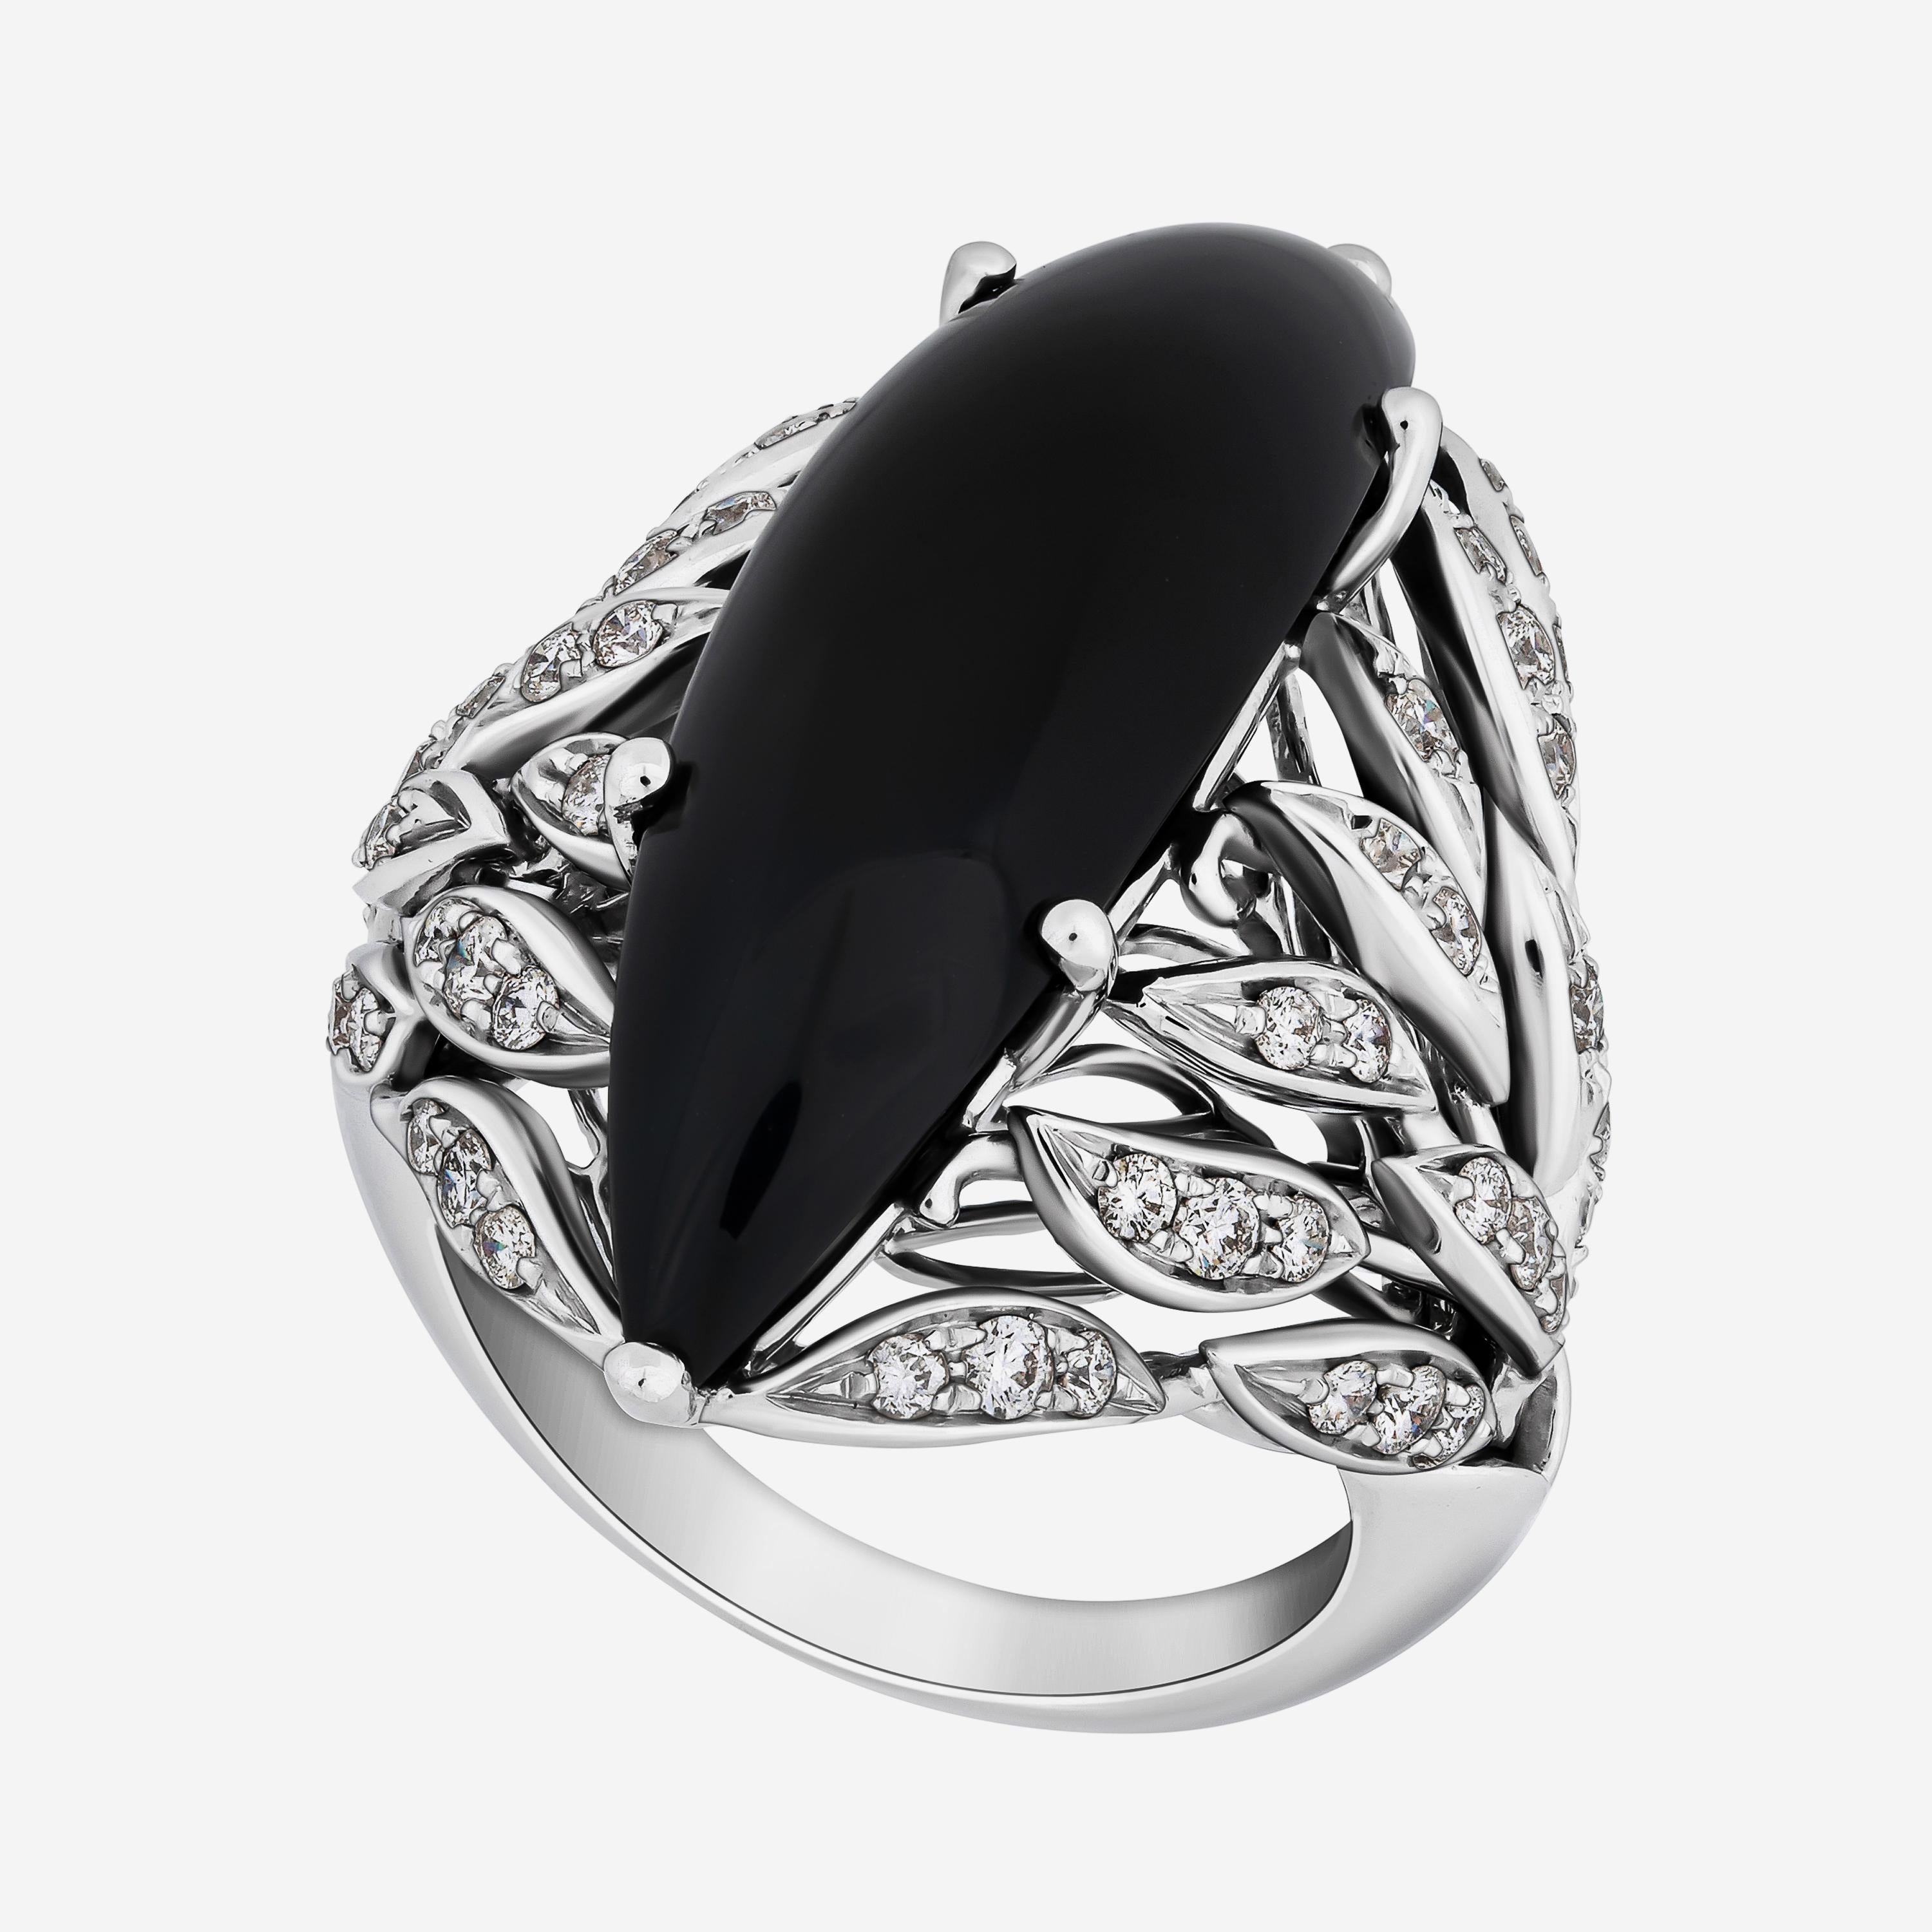 Contemporary Luca Carati 18K White Gold, Onyx and Diamond Ring sz 6.75 For Sale